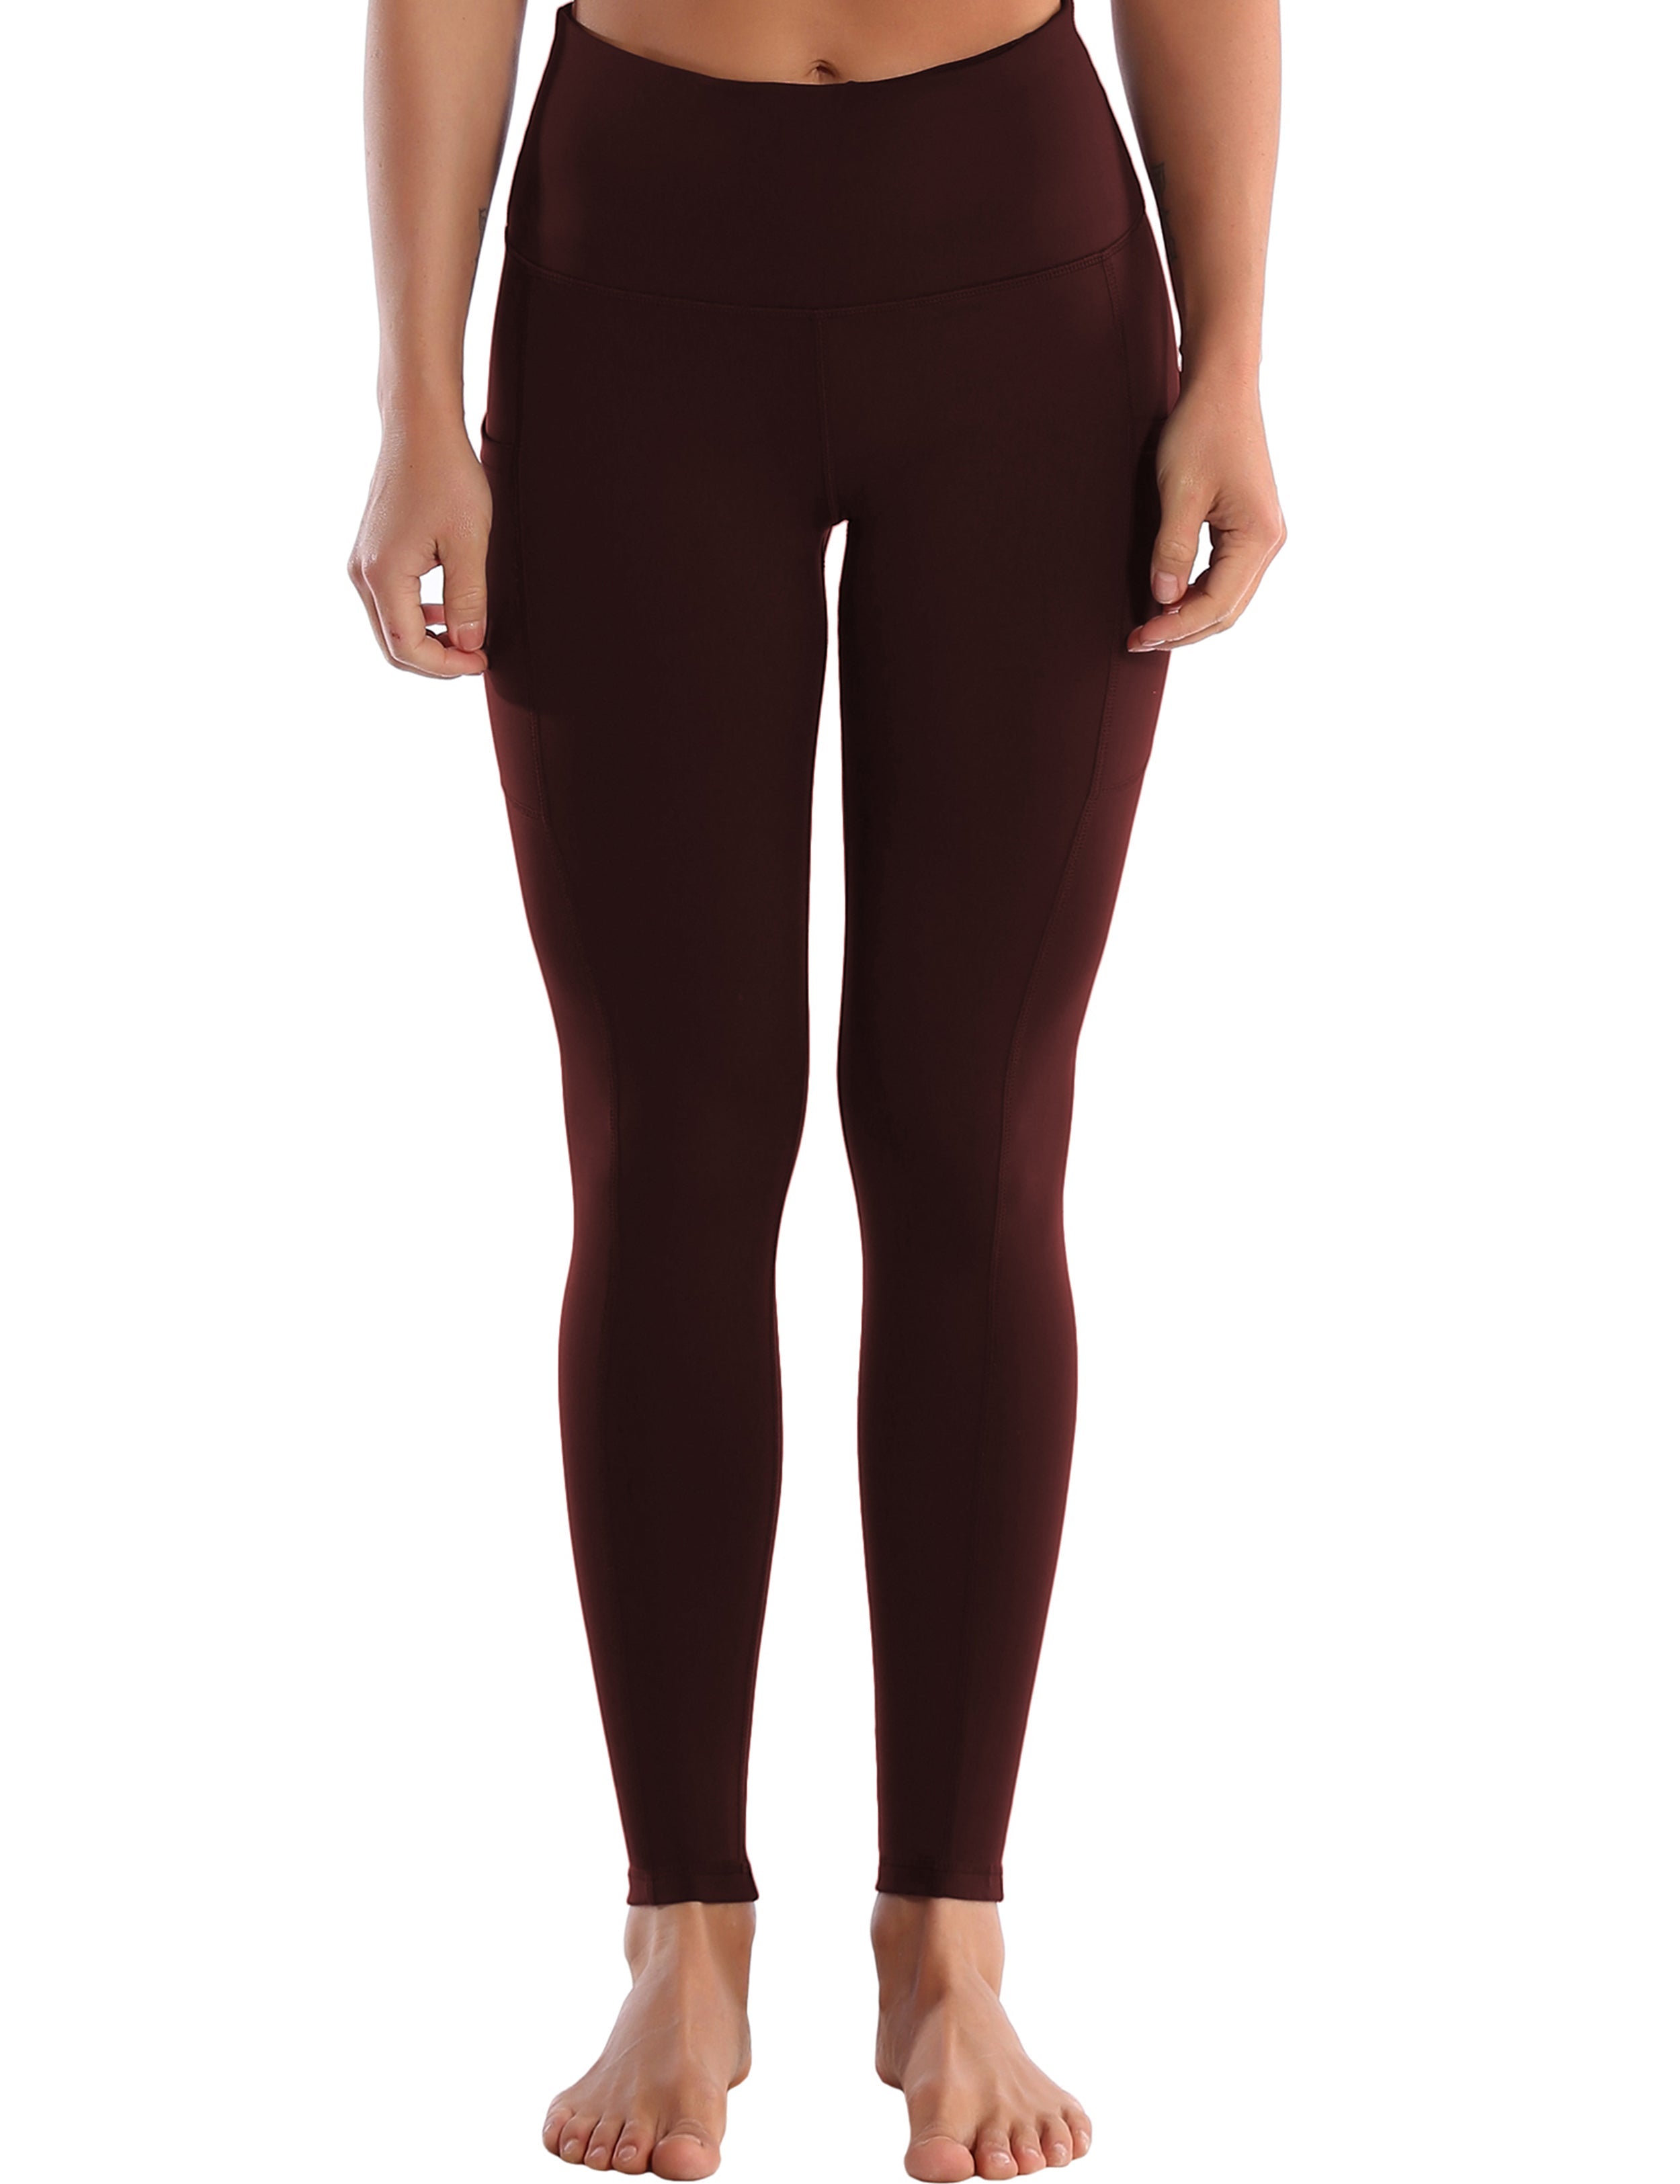 Hip Line Side Pockets Biking Pants mahoganymaroon Sexy Hip Line Side Pockets 75%Nylon/25%Spandex Fabric doesn't attract lint easily 4-way stretch No see-through Moisture-wicking Tummy control Inner pocket Two lengths